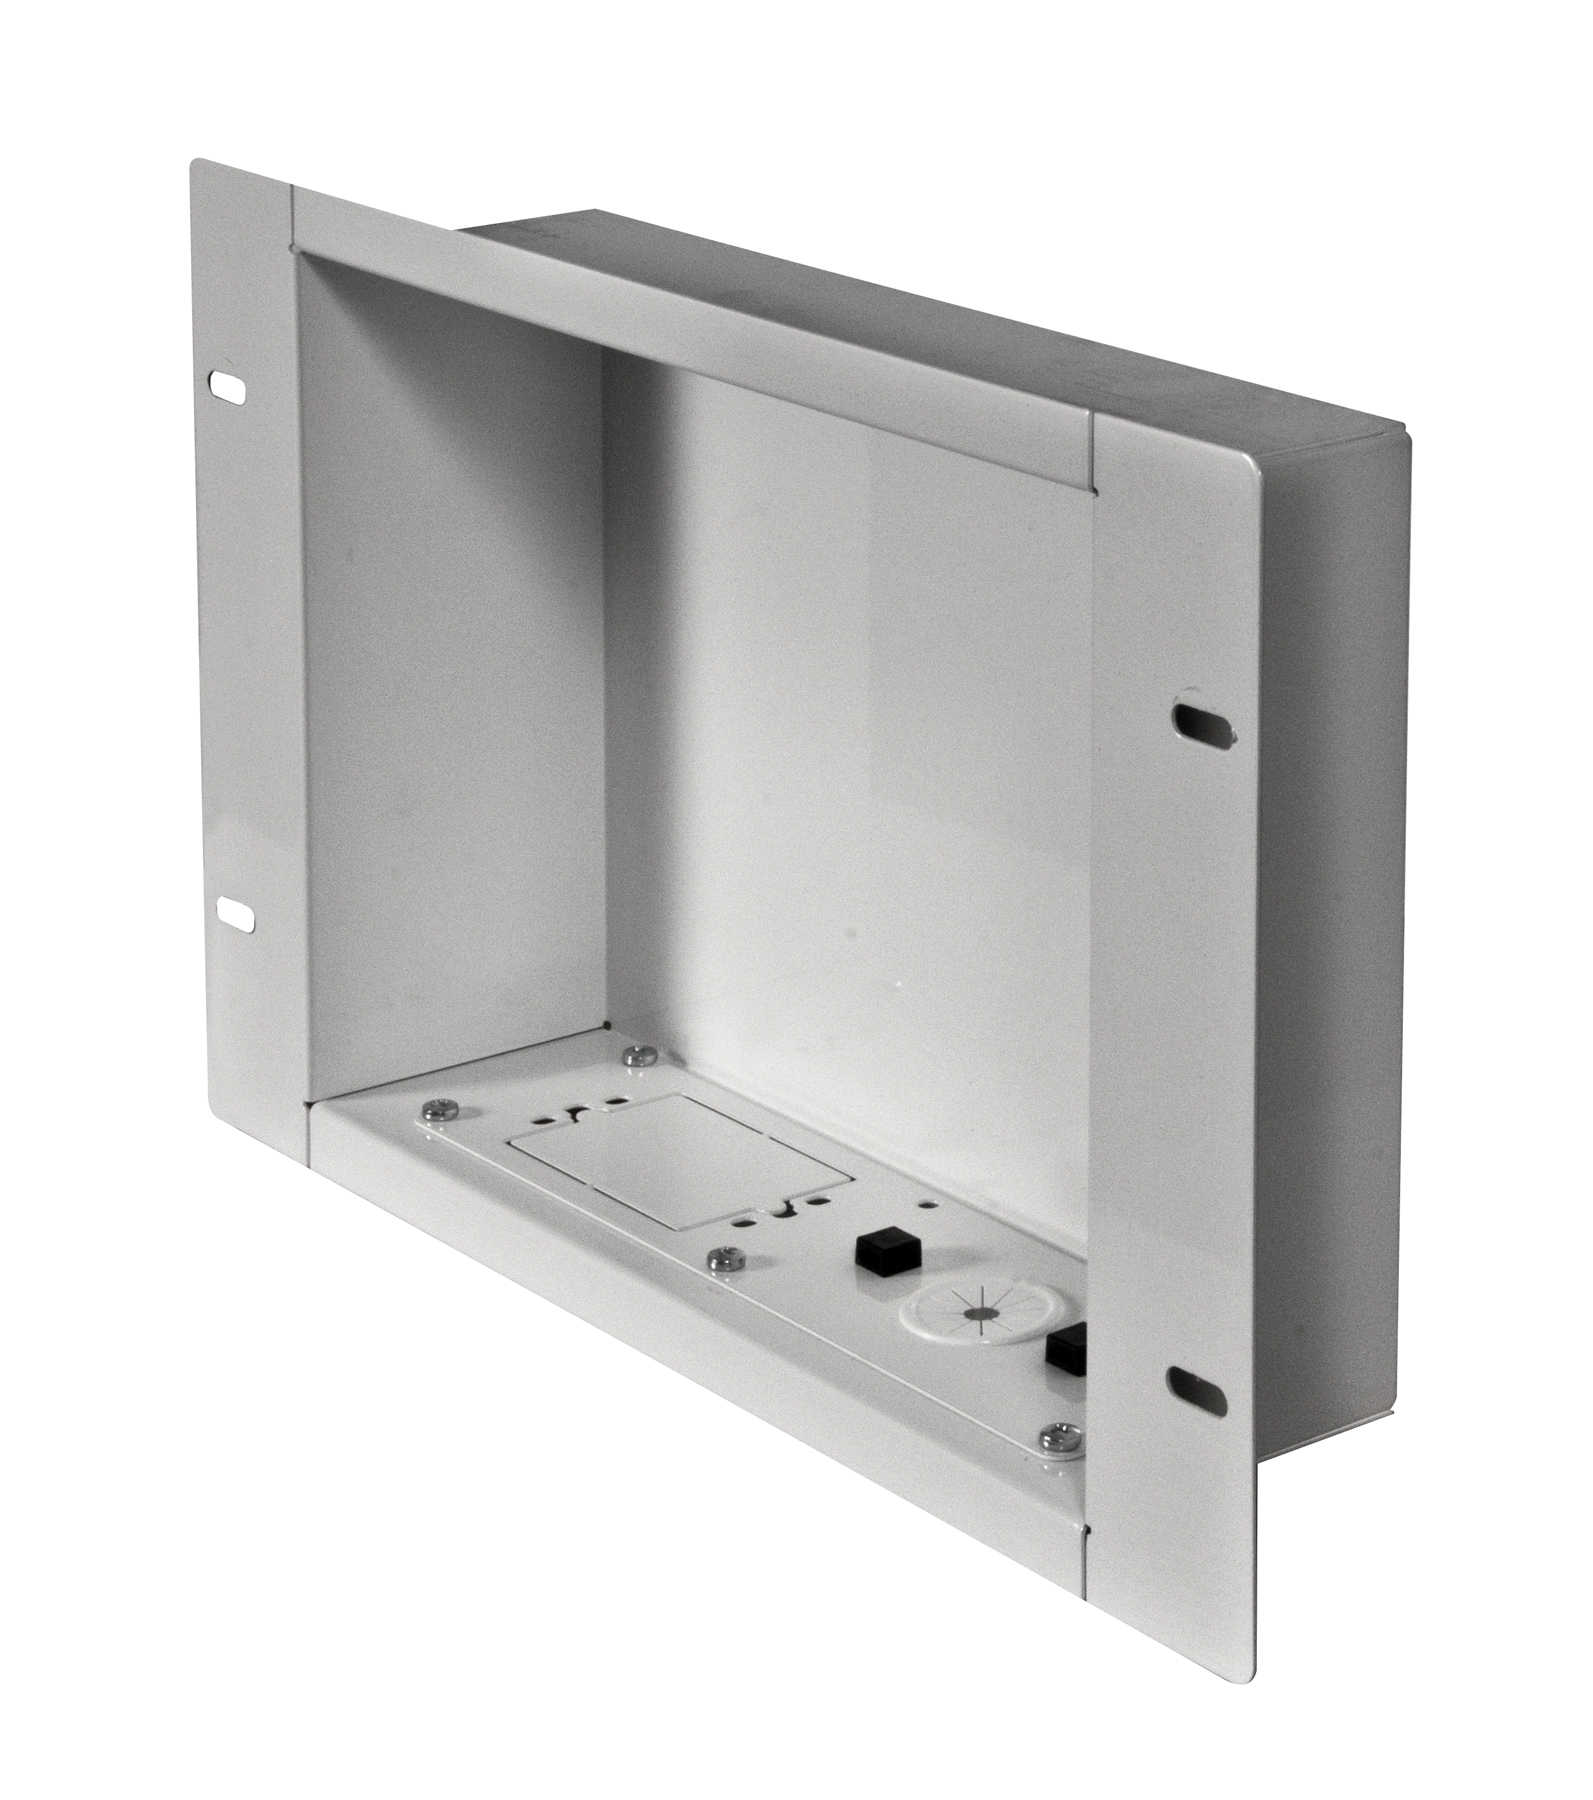 IBA2-W In-Wall Accessory Box for Recessed Cable Management and Power Storage